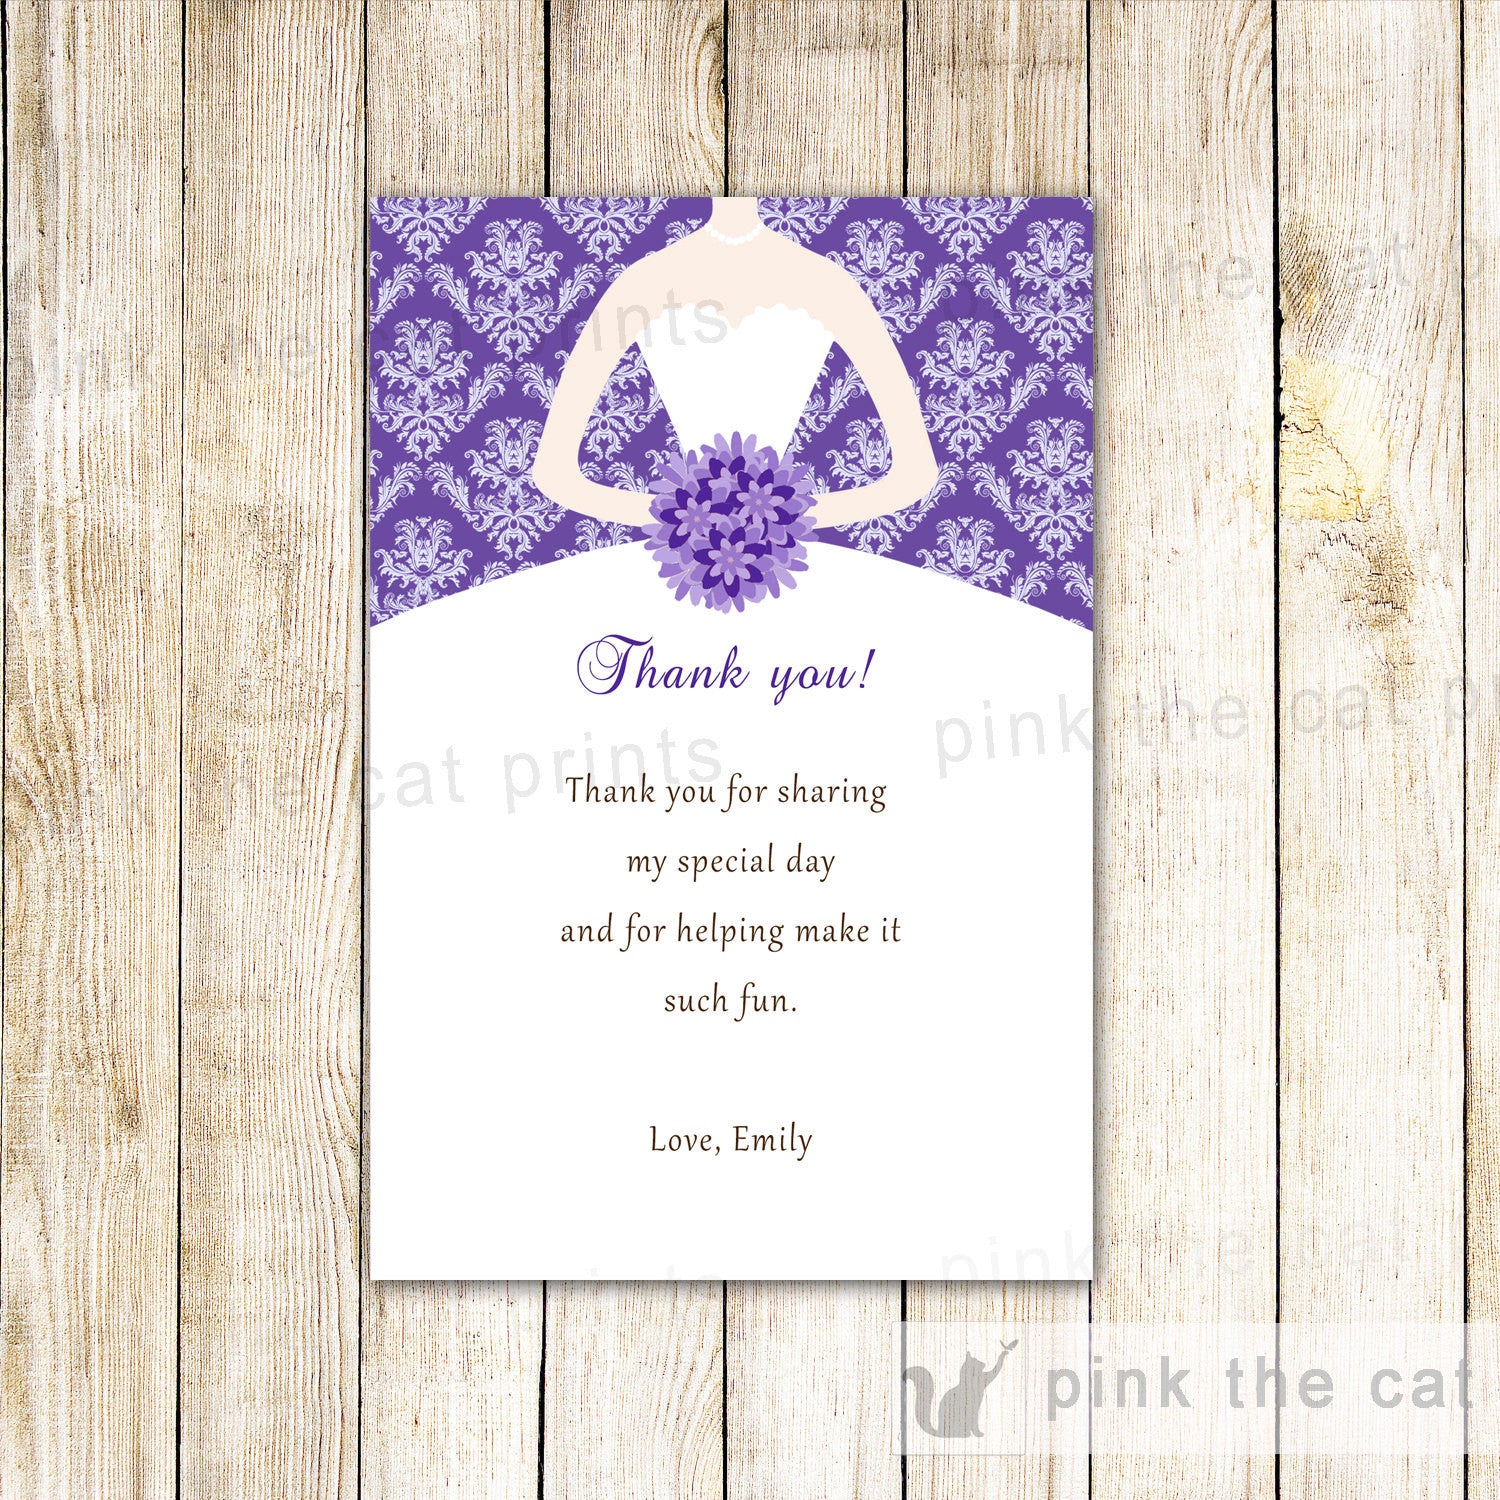 Home Garden Greeting Cards Party Supply Bridal Shower Thank You Cards Wedding Black Dresses